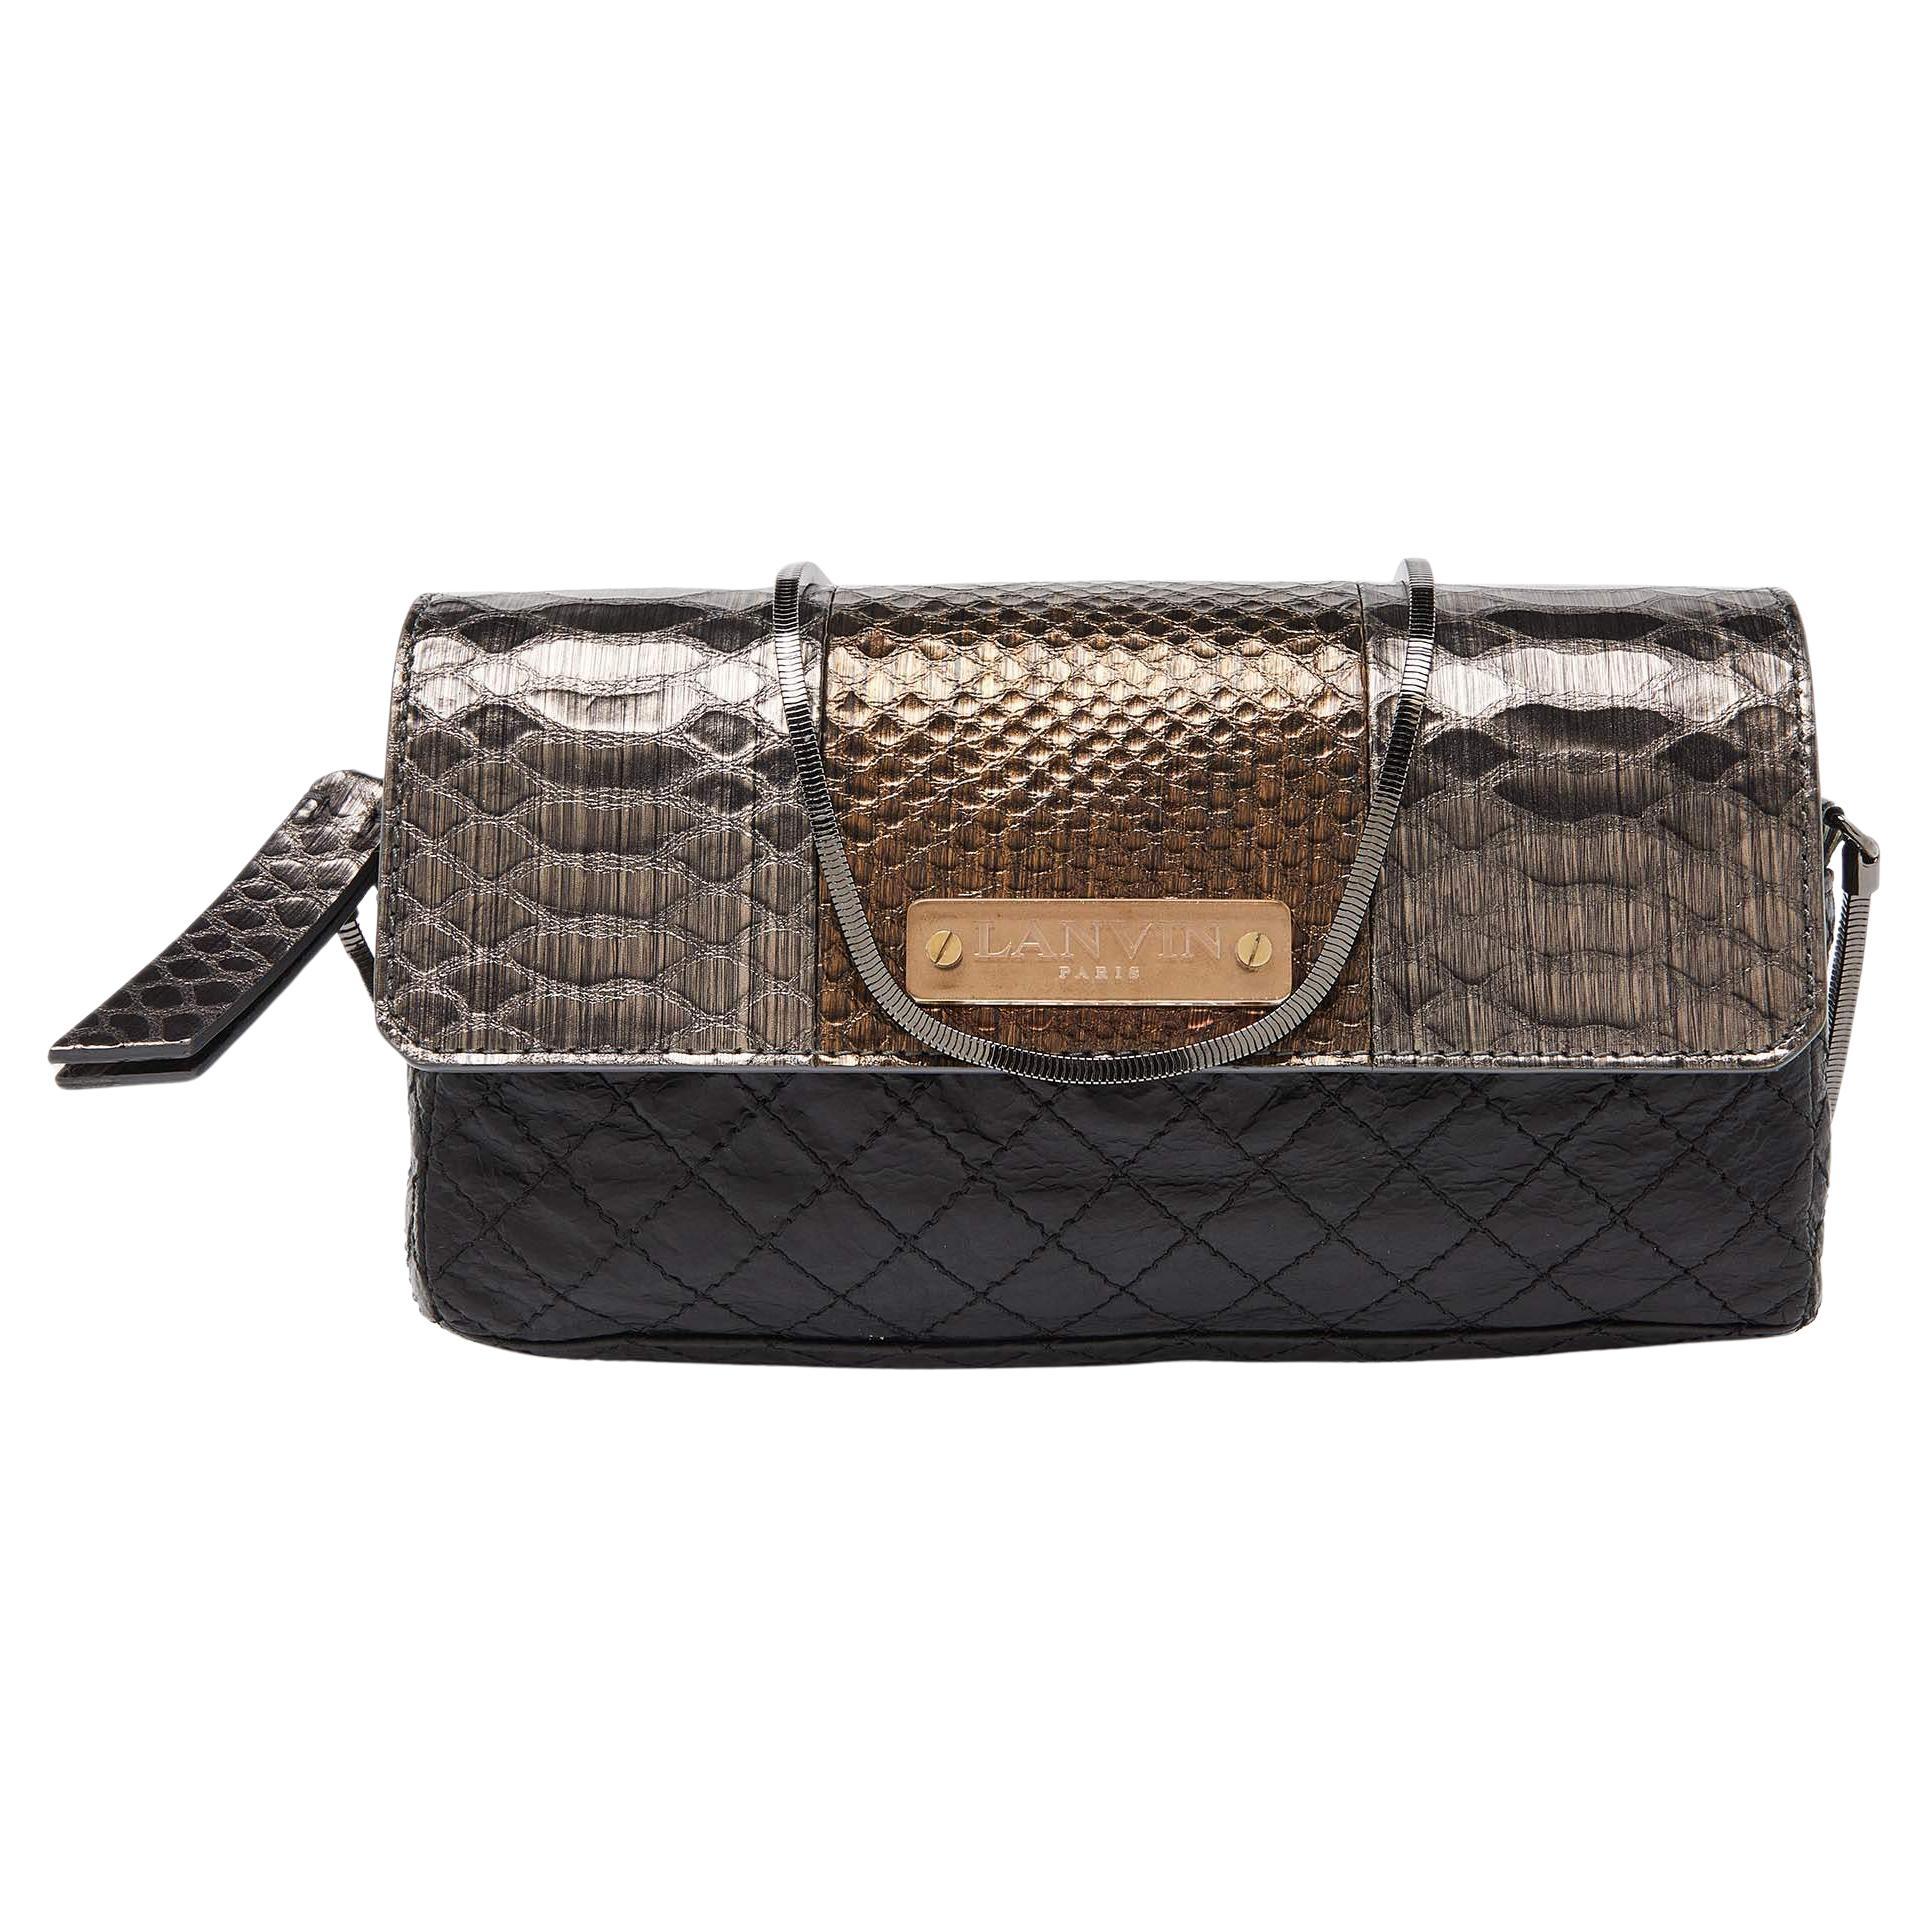 Lanvin Black/Gold Quilted Leather and Python Embossed Leather Flap Crossbody Bag en vente